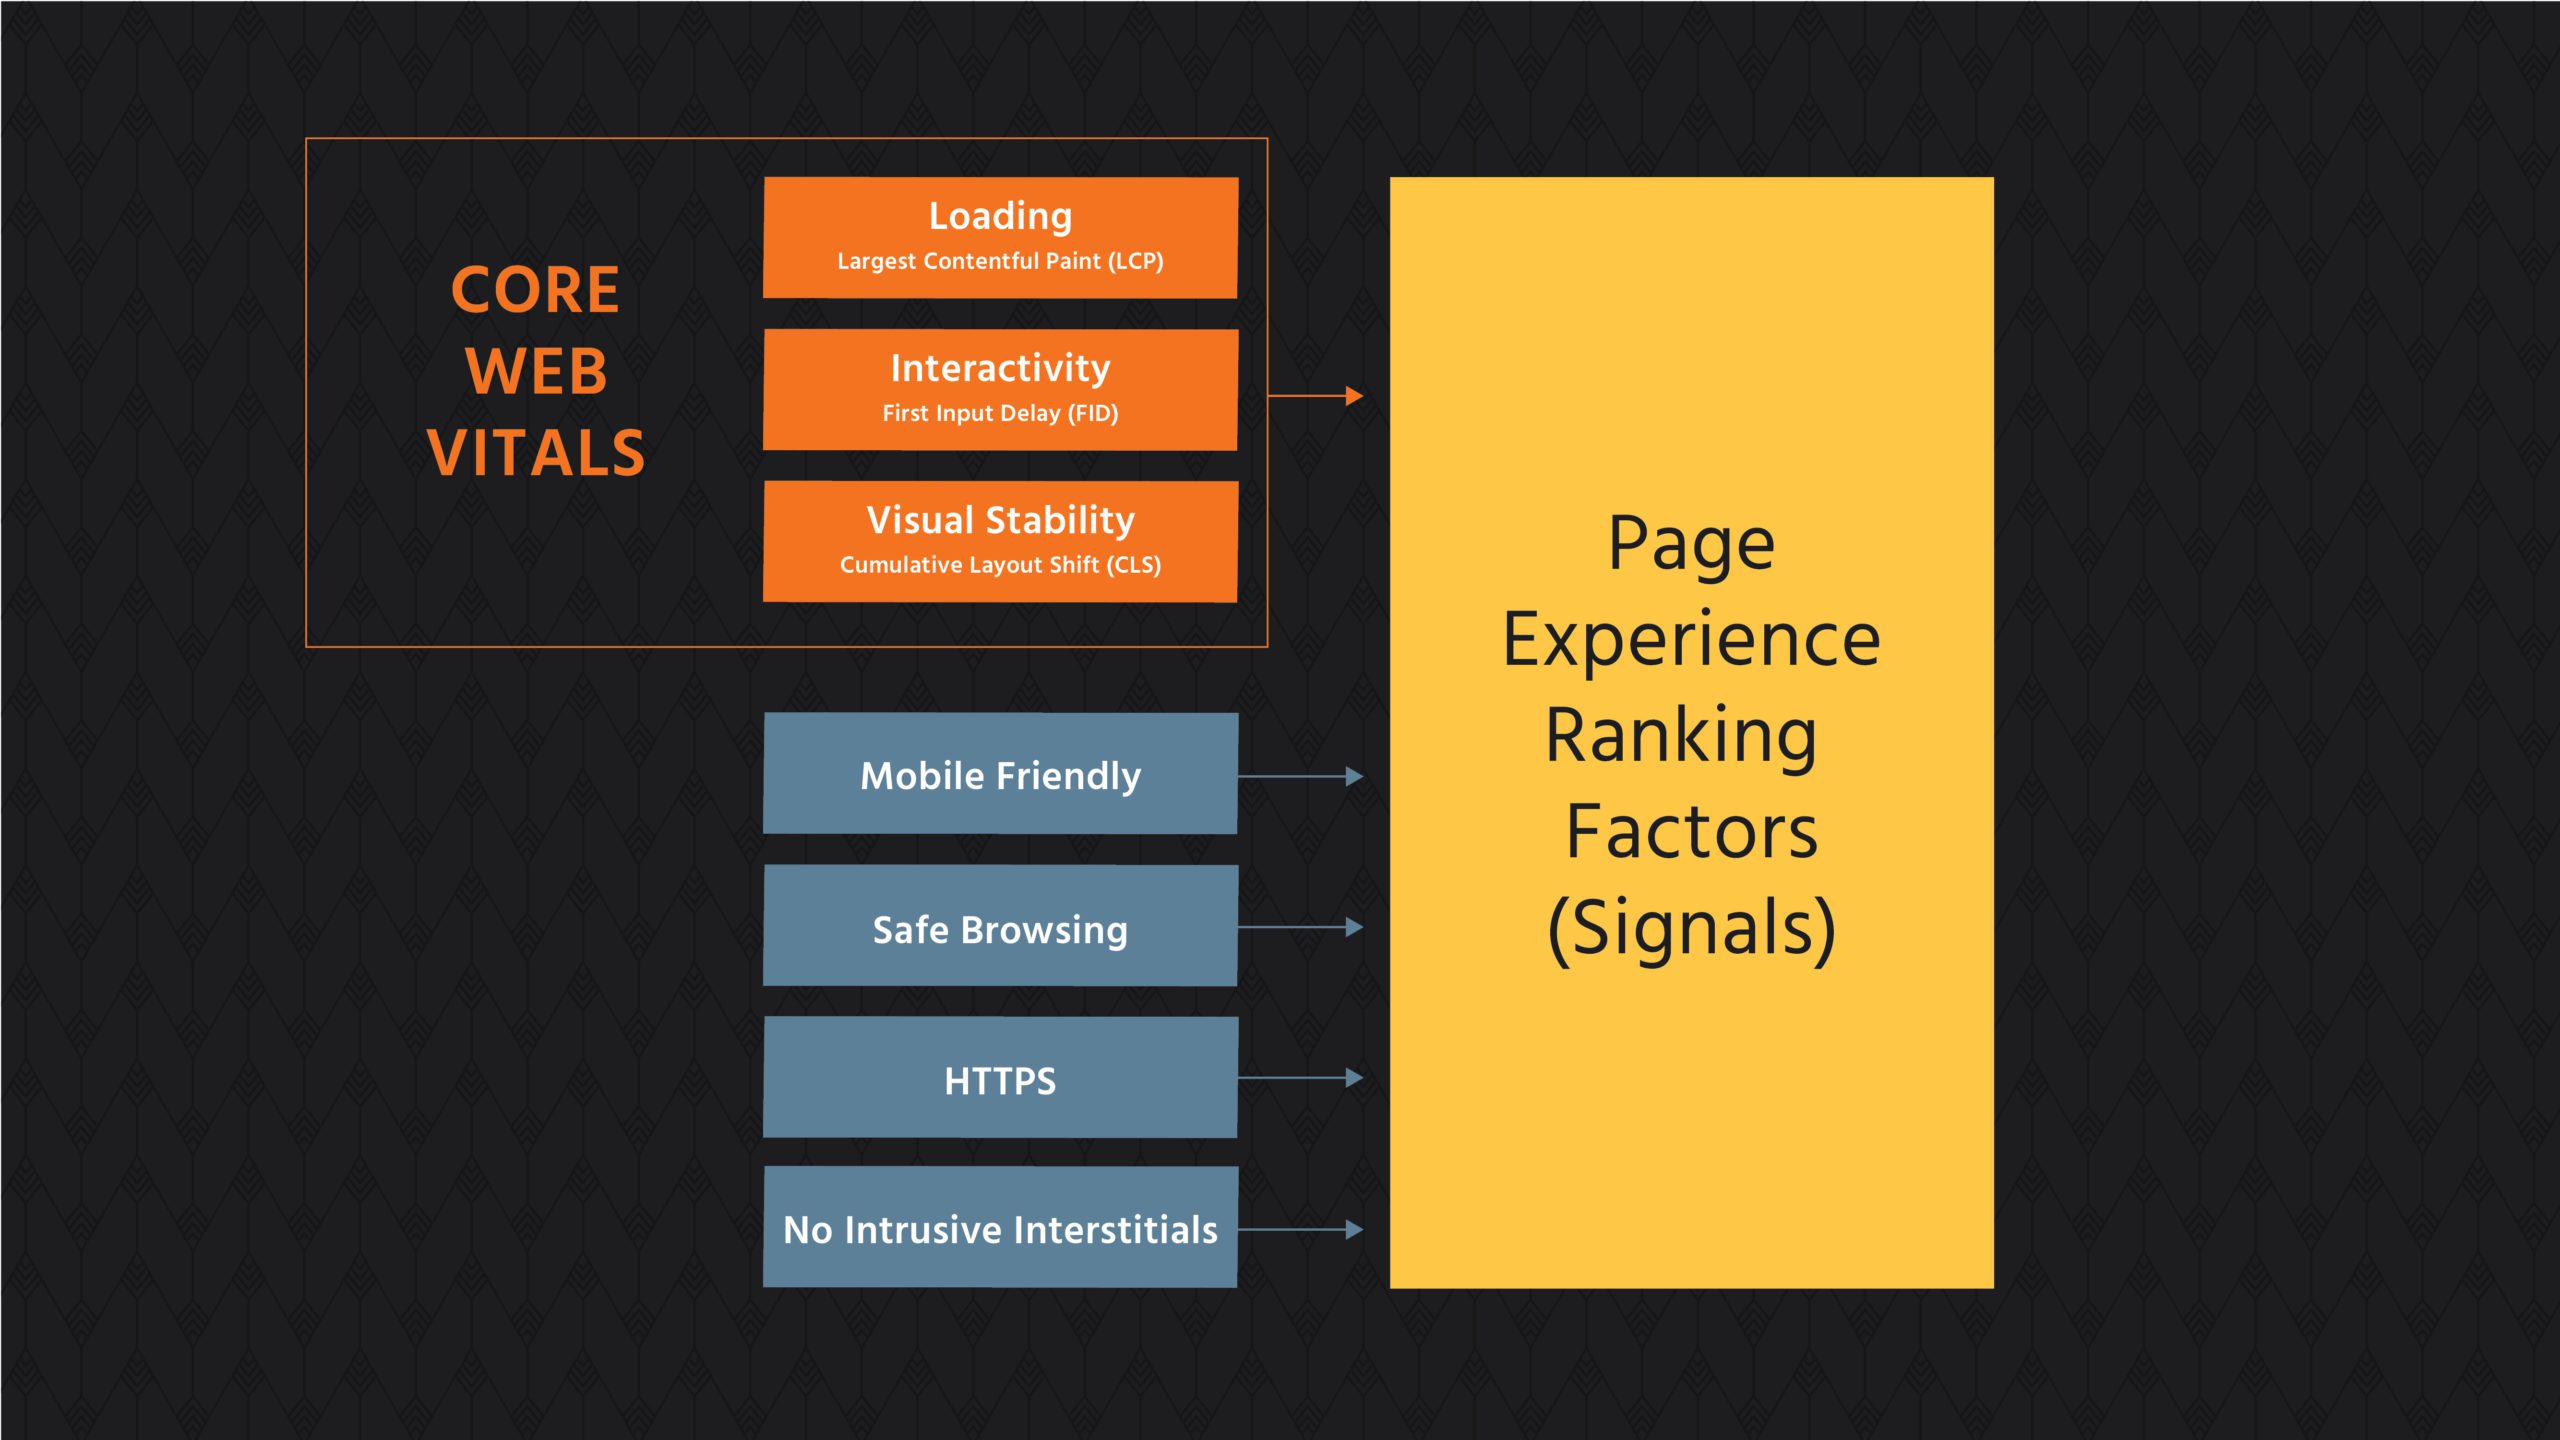 This graphic explains the 5 key ranking factors for Page Experience: Core Web Vitals, Mobile Friendly, Safe Browsing, HTTPS, and No Intrusive Interstitials.